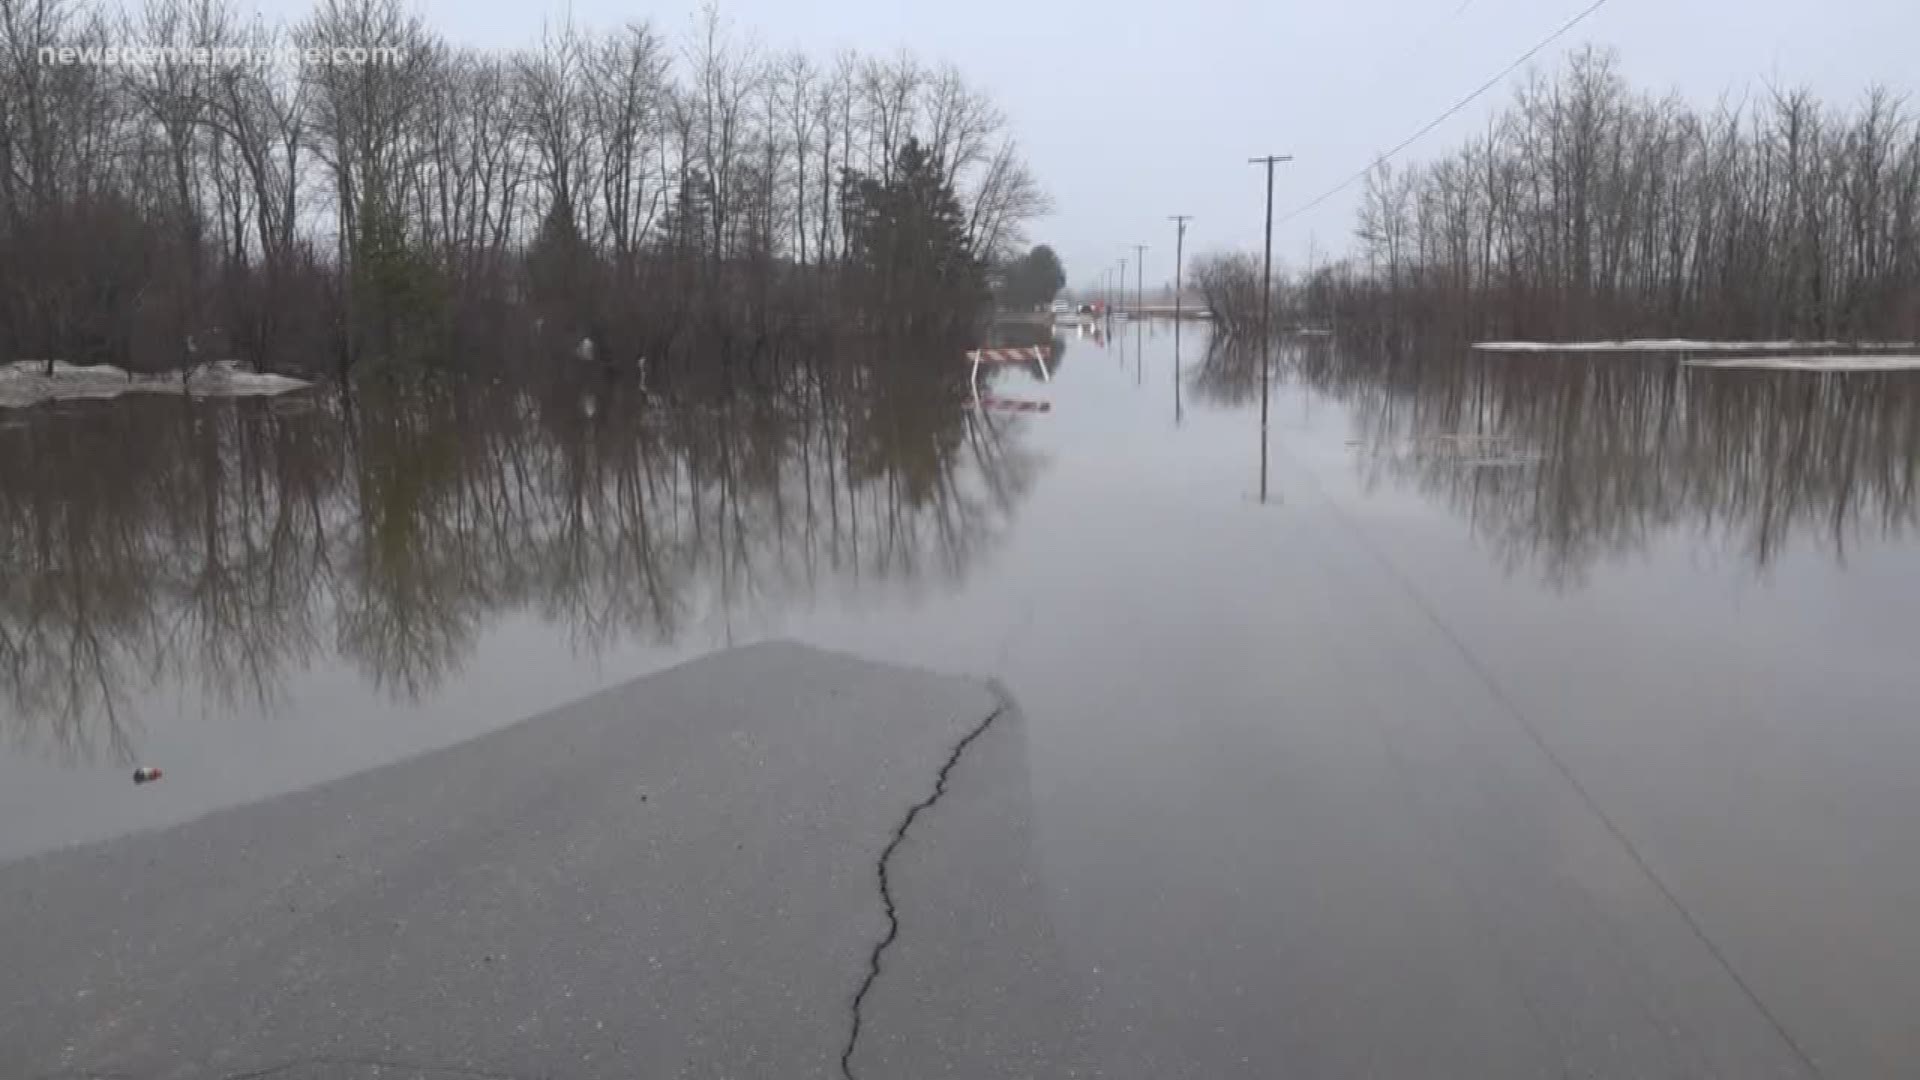 Rising water levels in Aroostook county are flooding homes and closing roads.